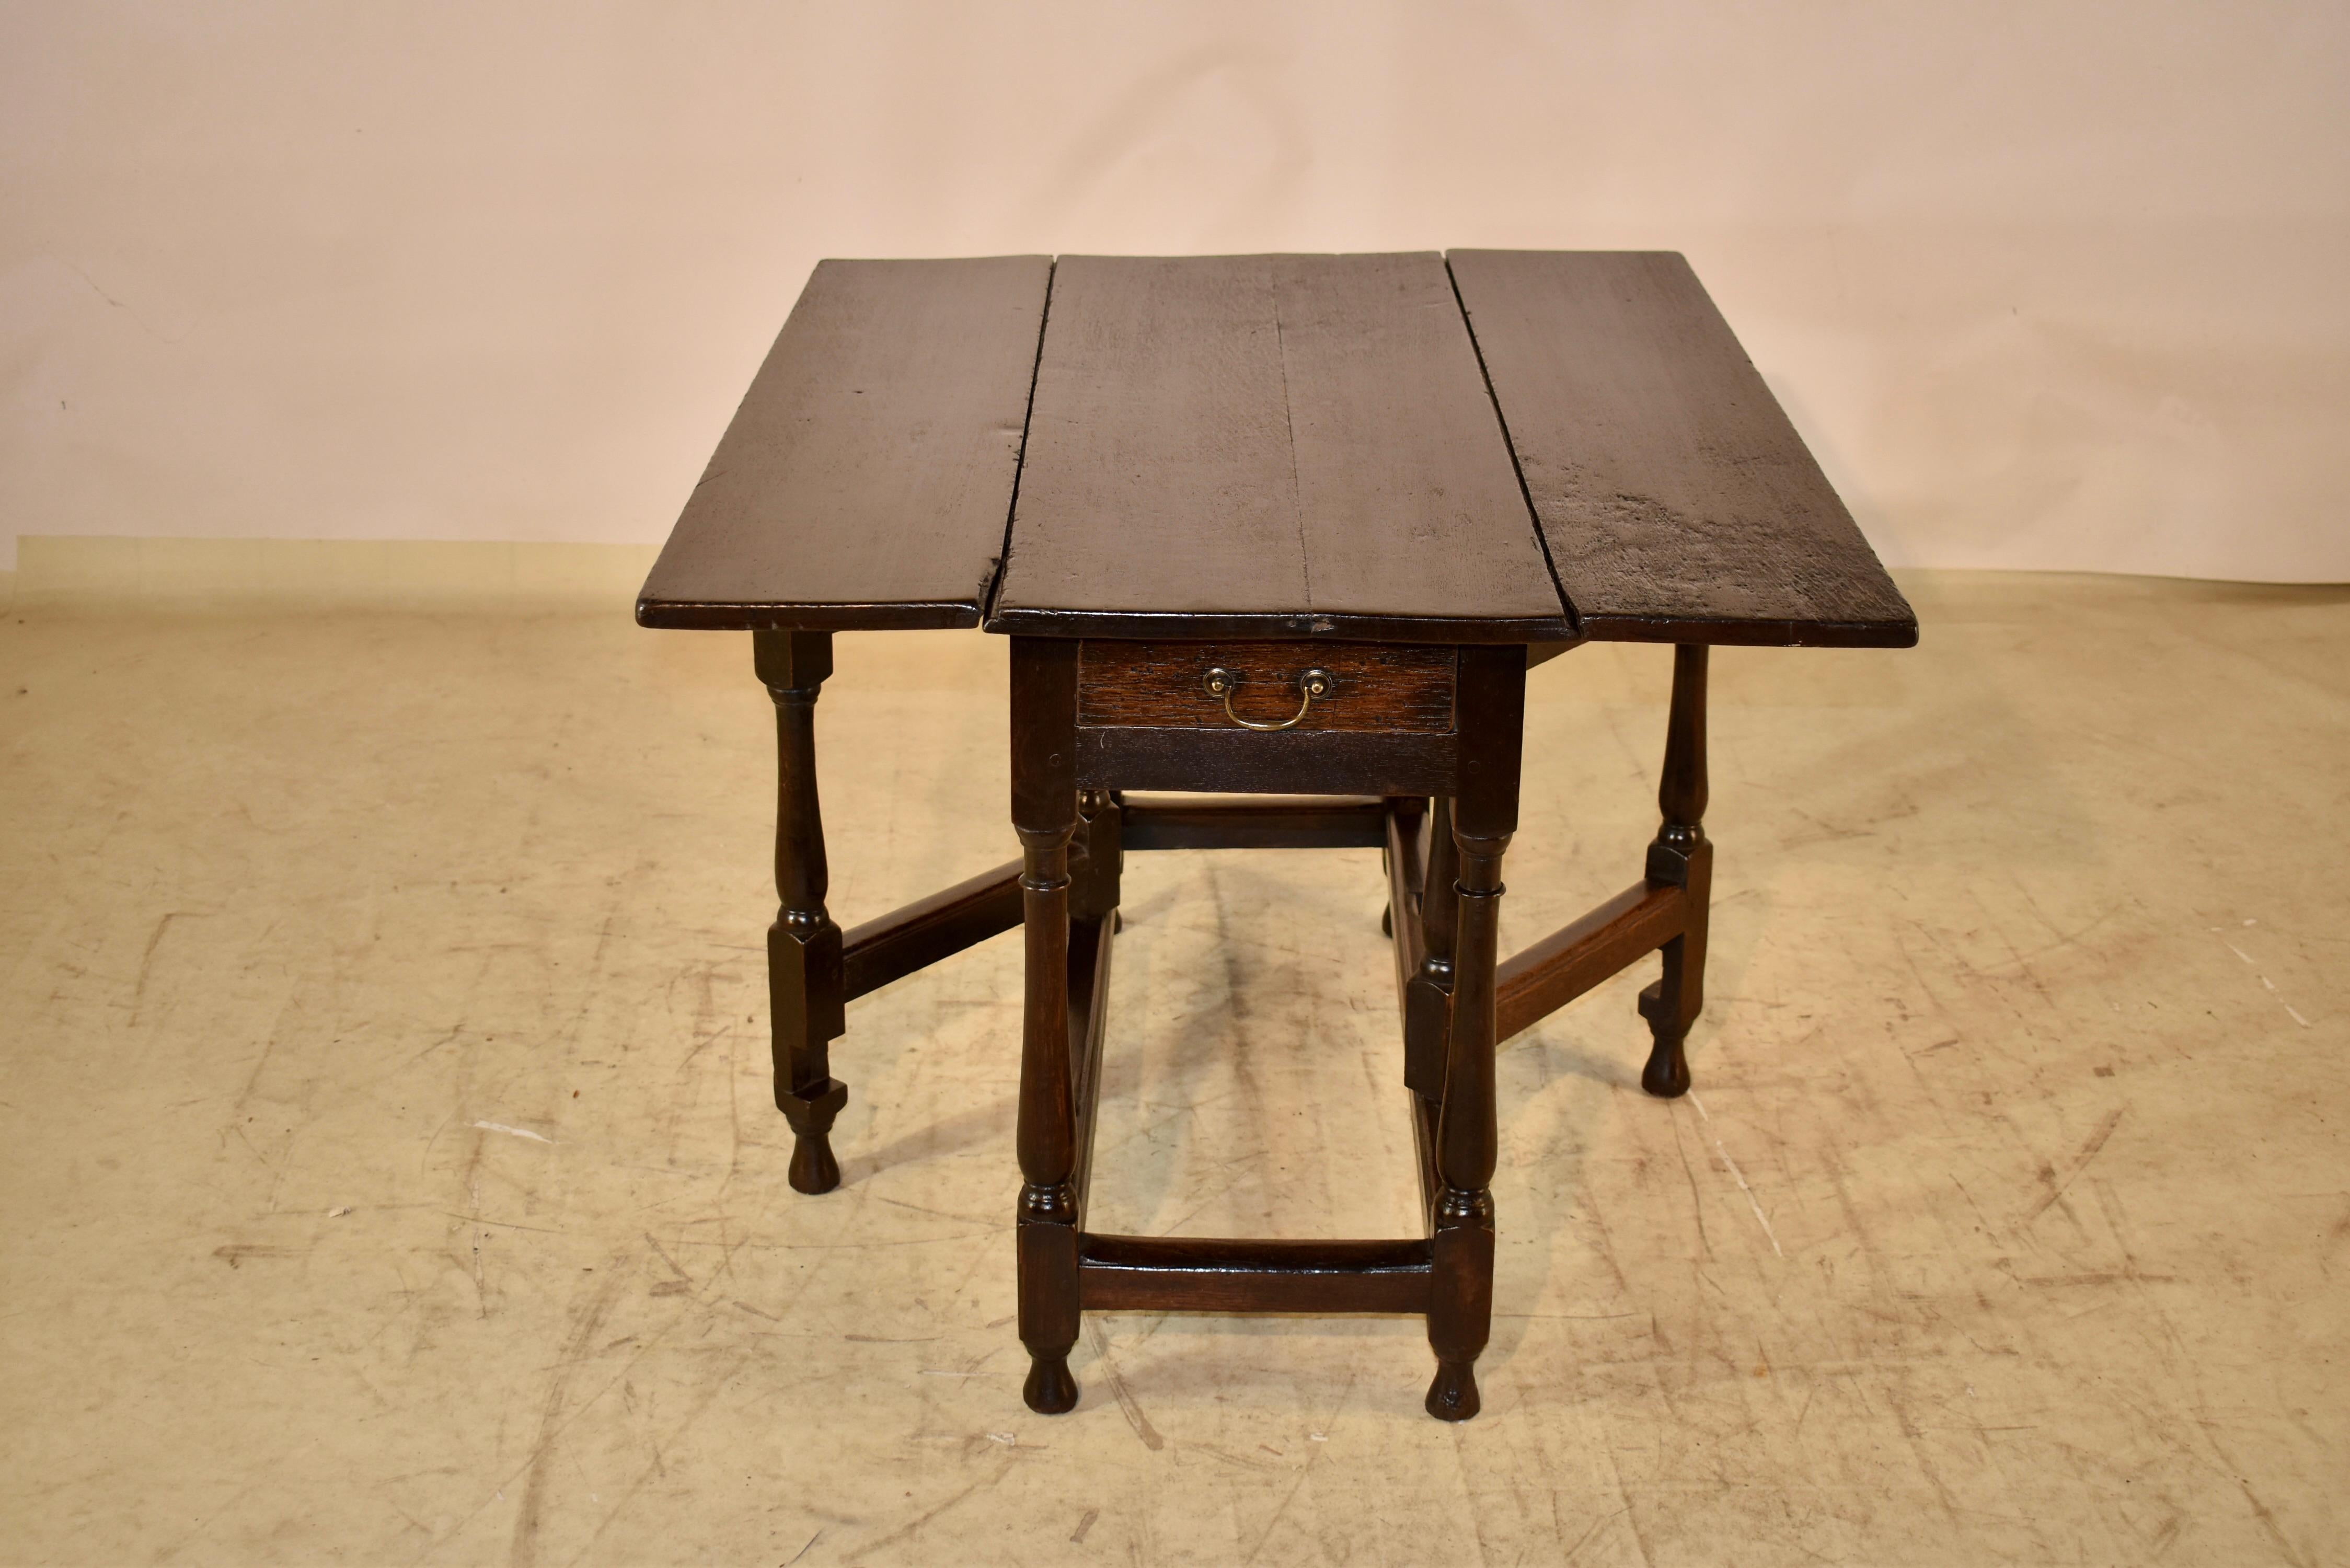 Late 17th - Early 18th Century Drop Leaf Table from England For Sale 3